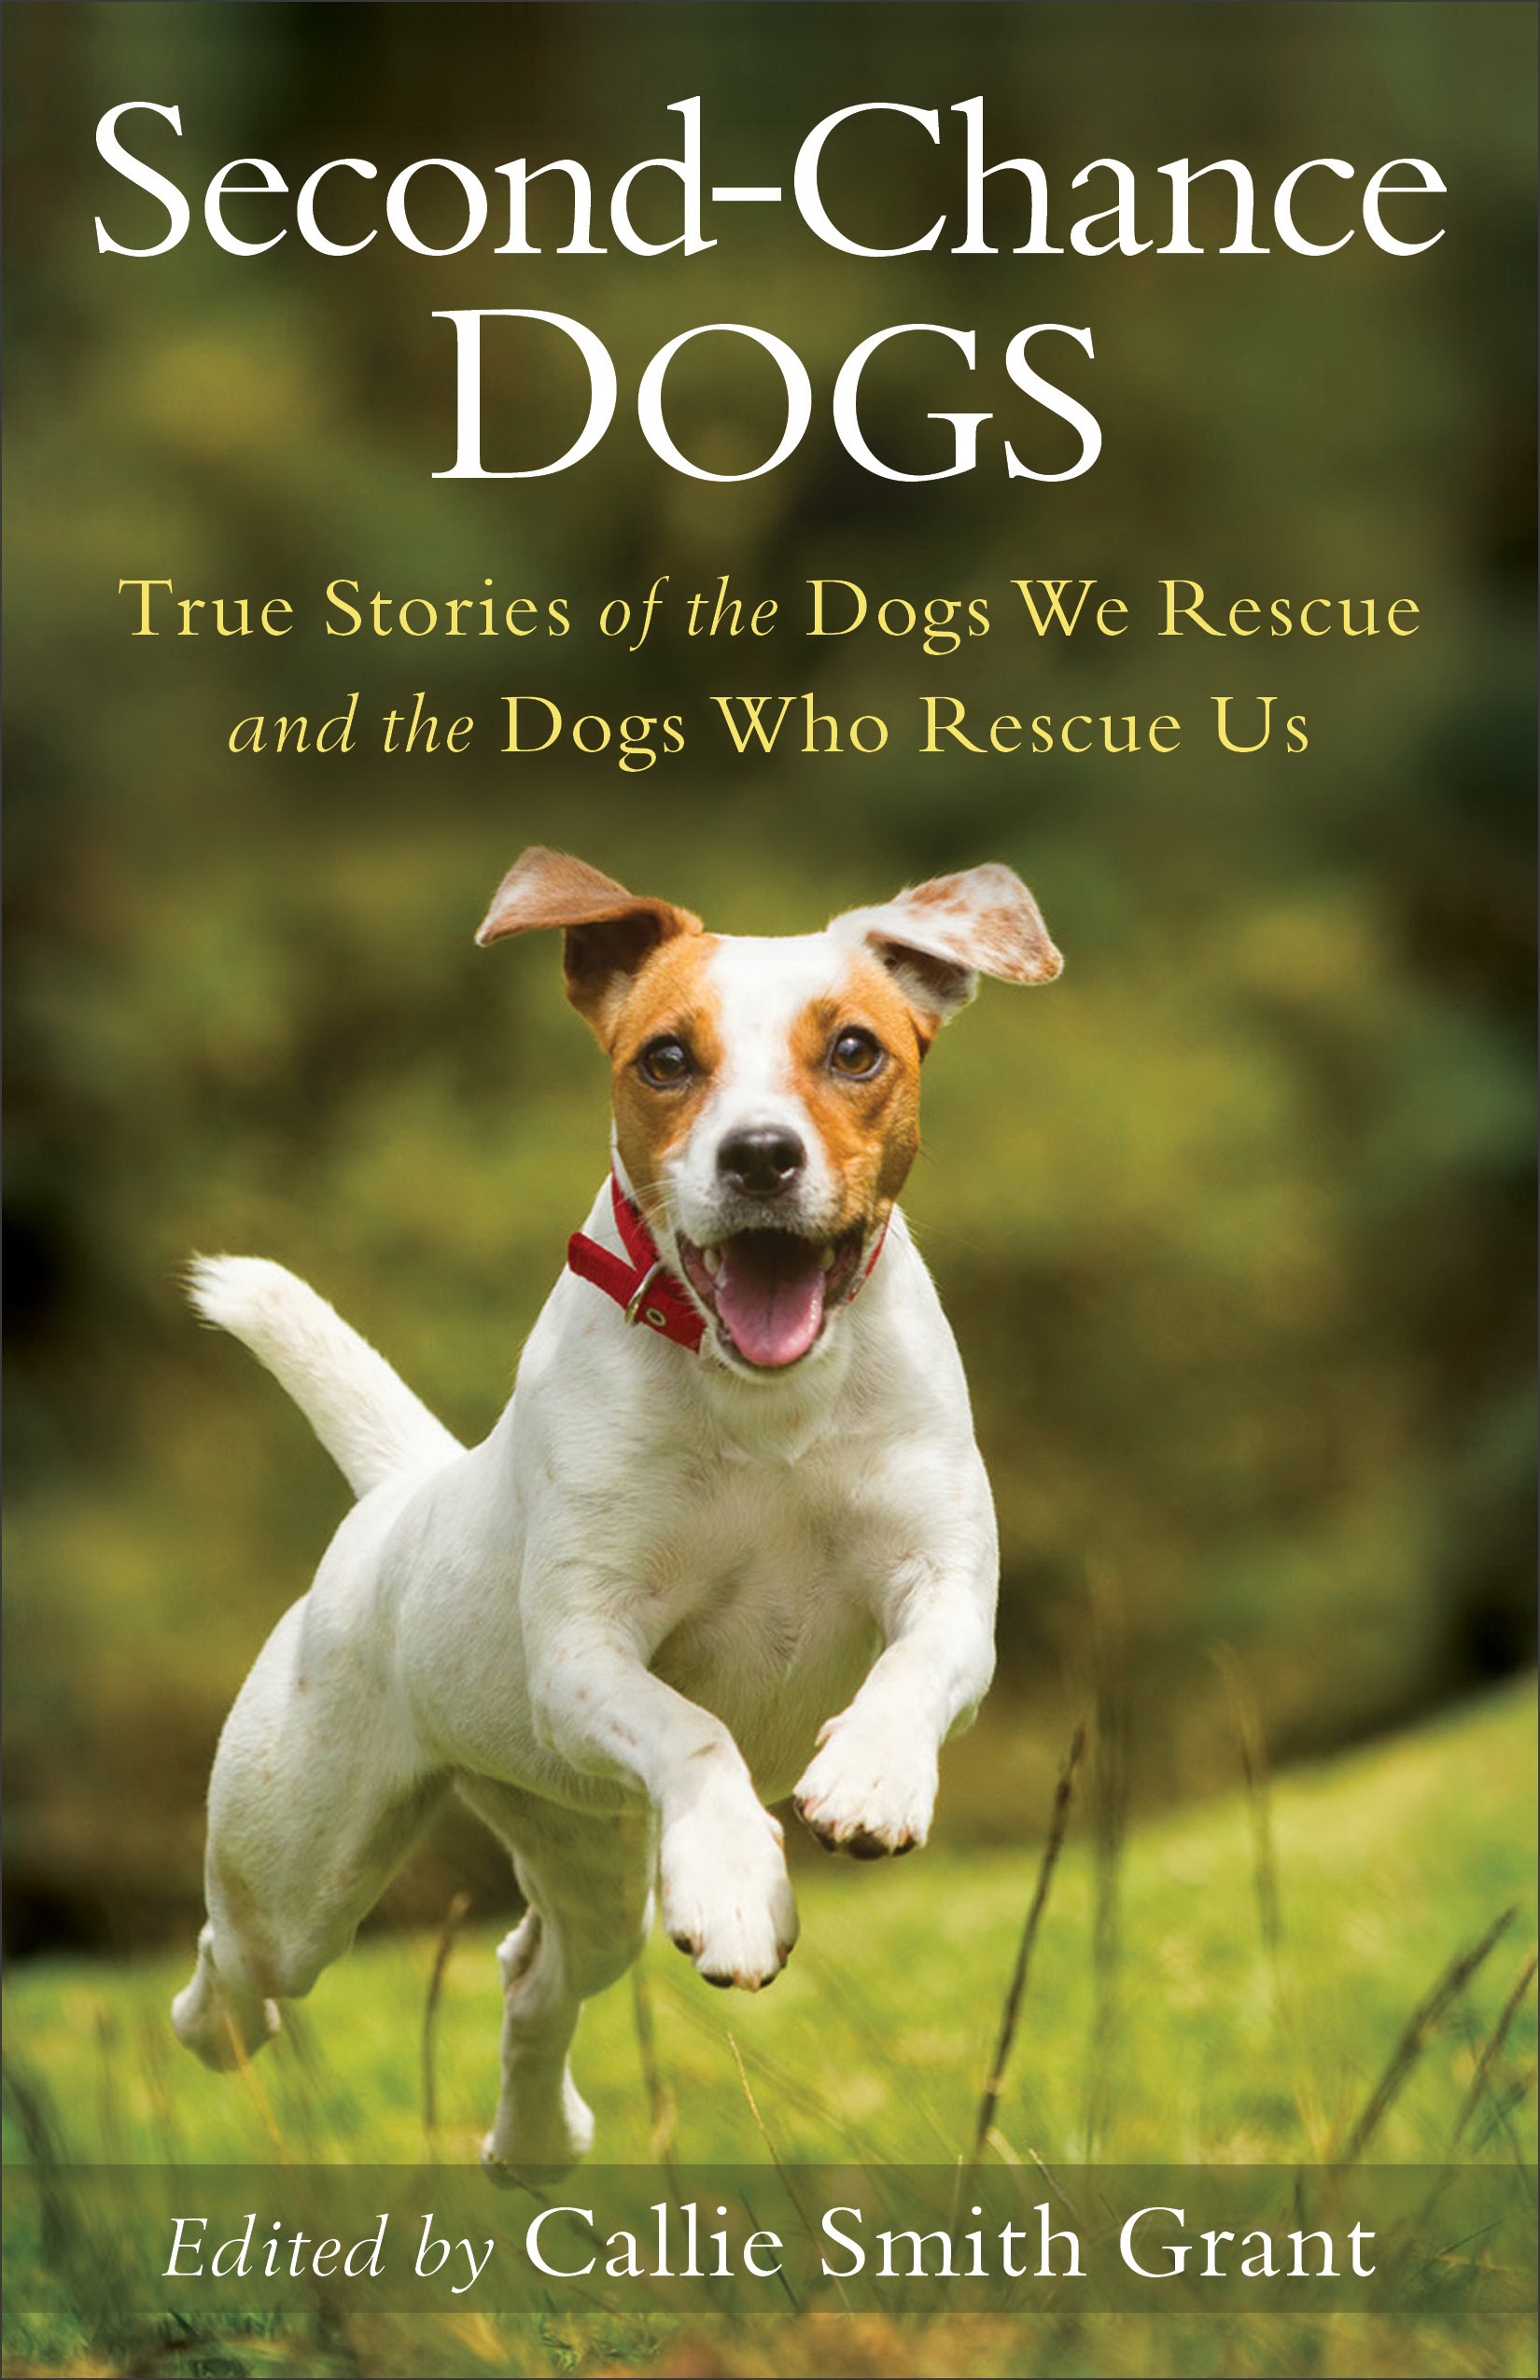 Second-Chance Dogs: True Stories of the Dogs We Rescue and the Dogs Who Rescue Us | Free